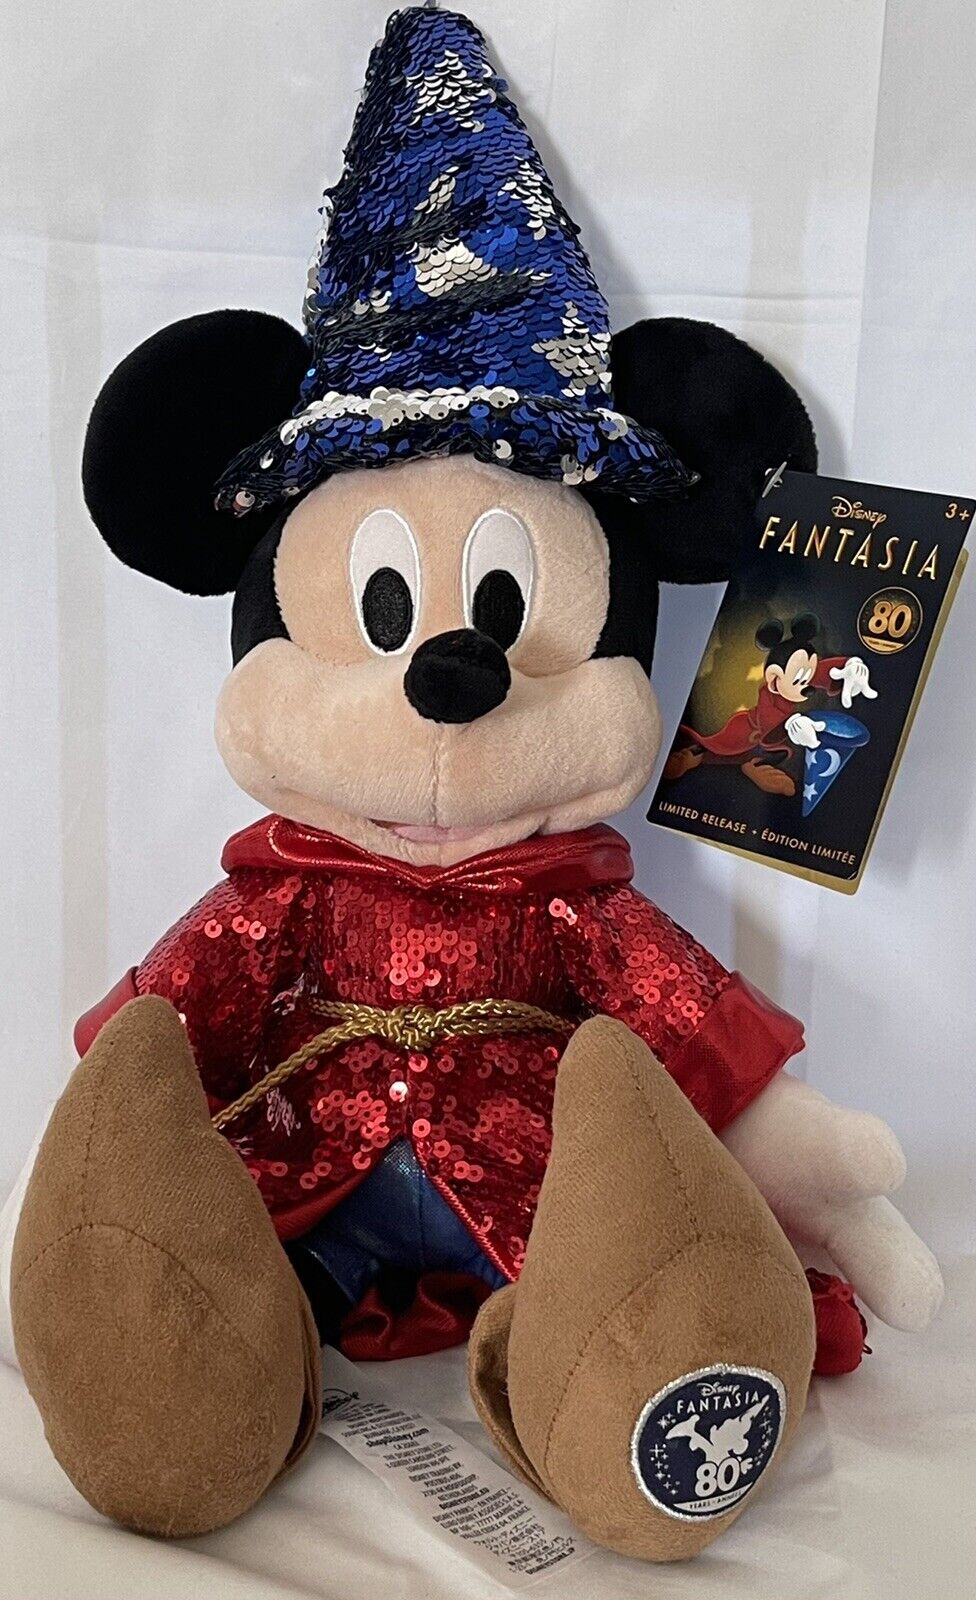 Disney Fantasia 80th Mickey Mouse Sorcerer Sequined Plush Brand New NWTS Limited